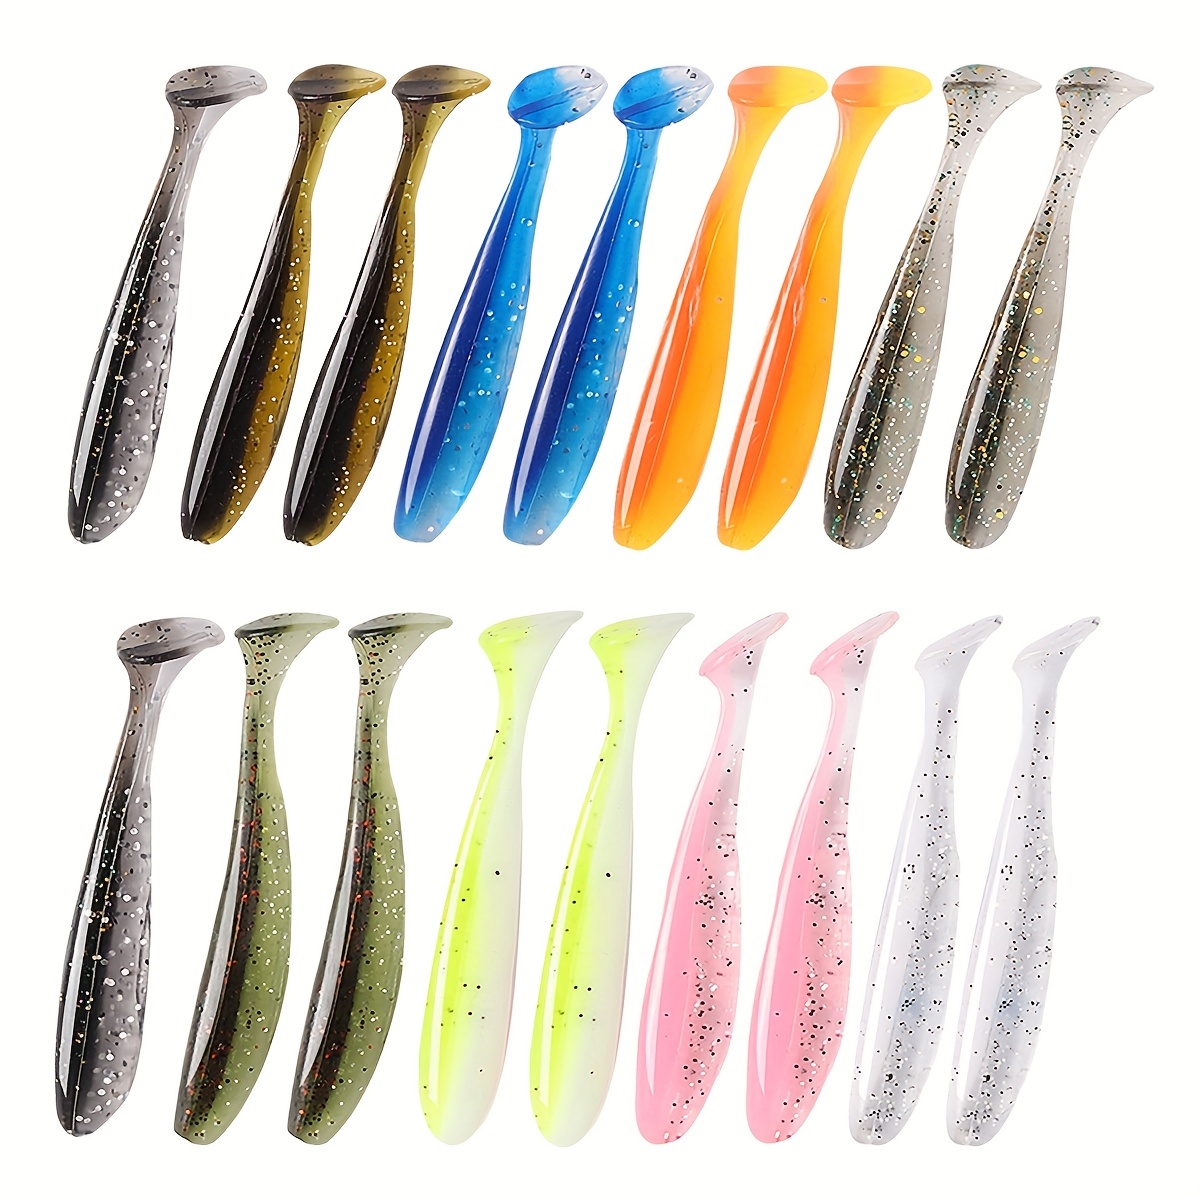 19pcs Bionic Paddle Tail Soft Fishing Lure Set - Perfect for Perch, Trout,  Red Fish, Freshwater and Saltwater Fishing - Includes PVA Swimbait Wobblers